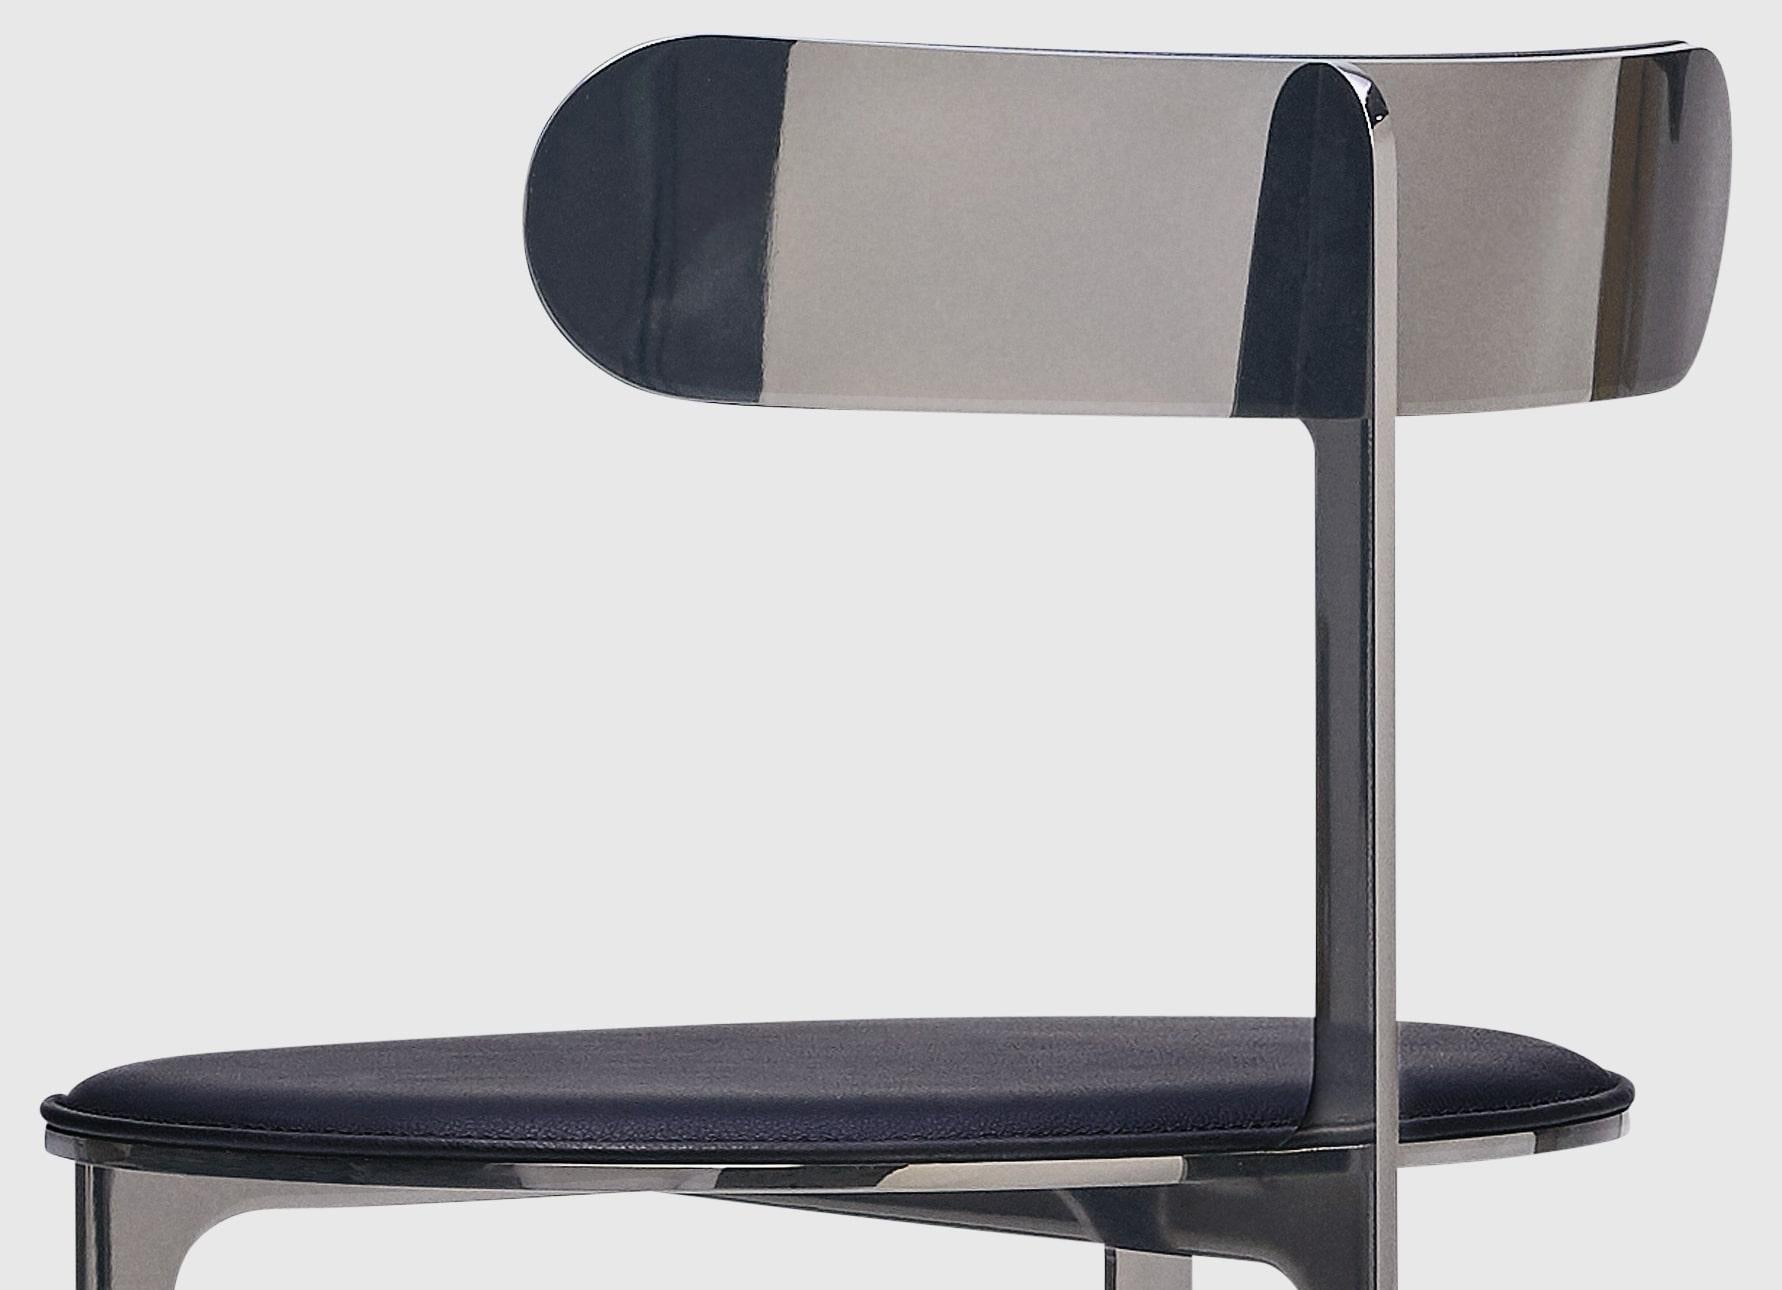 Park Place Dining Chair by Yabu Pushelberg in Black Nickel and Jacquard Tweed In New Condition For Sale In Toronto, ON